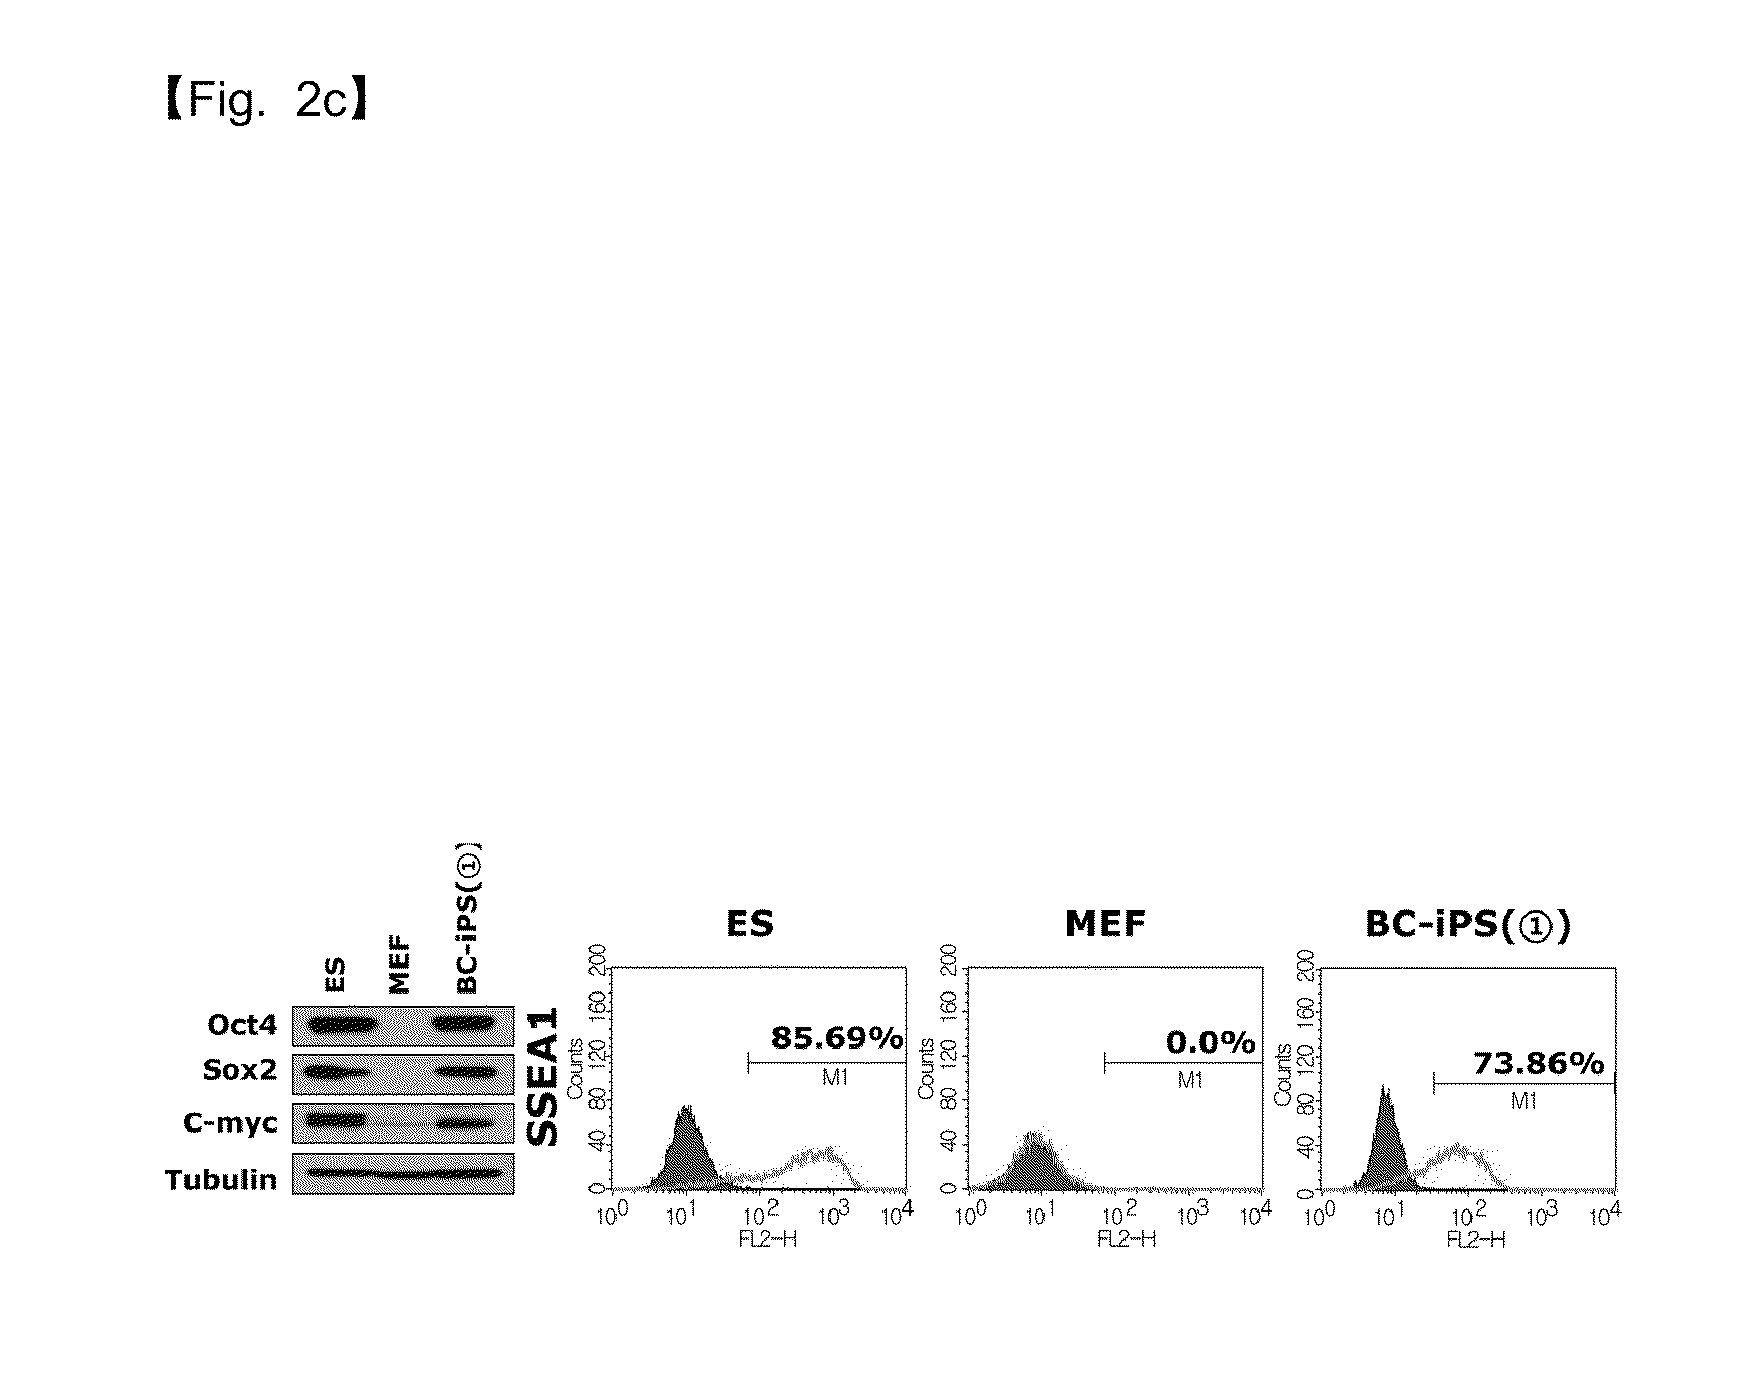 COMPOSITION FOR REPROGRAMMING SOMATIC CELLS TO GENERATE INDUCED PLURIPOTENT STEM CELLS, COMPRISING Bmi1 AND LOW MOLECULAR WEIGHT SUBSTANCE, AND METHOD FOR GENERATING INDUCED PLURIPOTENT STEM CELLS USING THE SAME